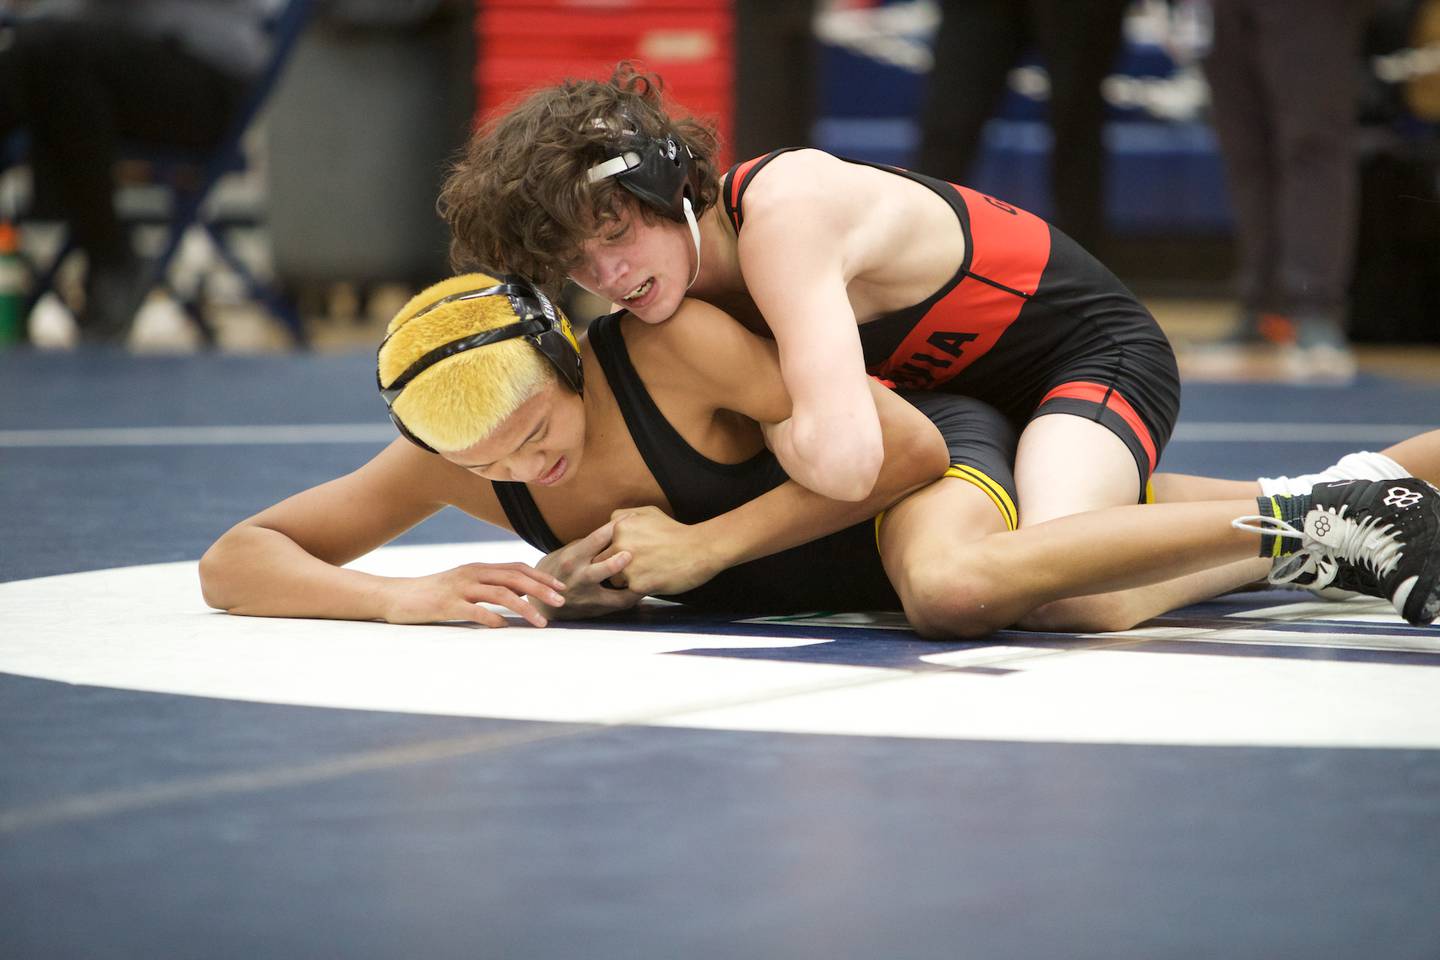 Batavia's Ino Garcia and Glenbard North's Kalani Kiev compete in the 113 lb. Finals at the DuKane Wrestling Conference meet at Lake Park High School on Saturday, Jan.21,2023 in Roselle.